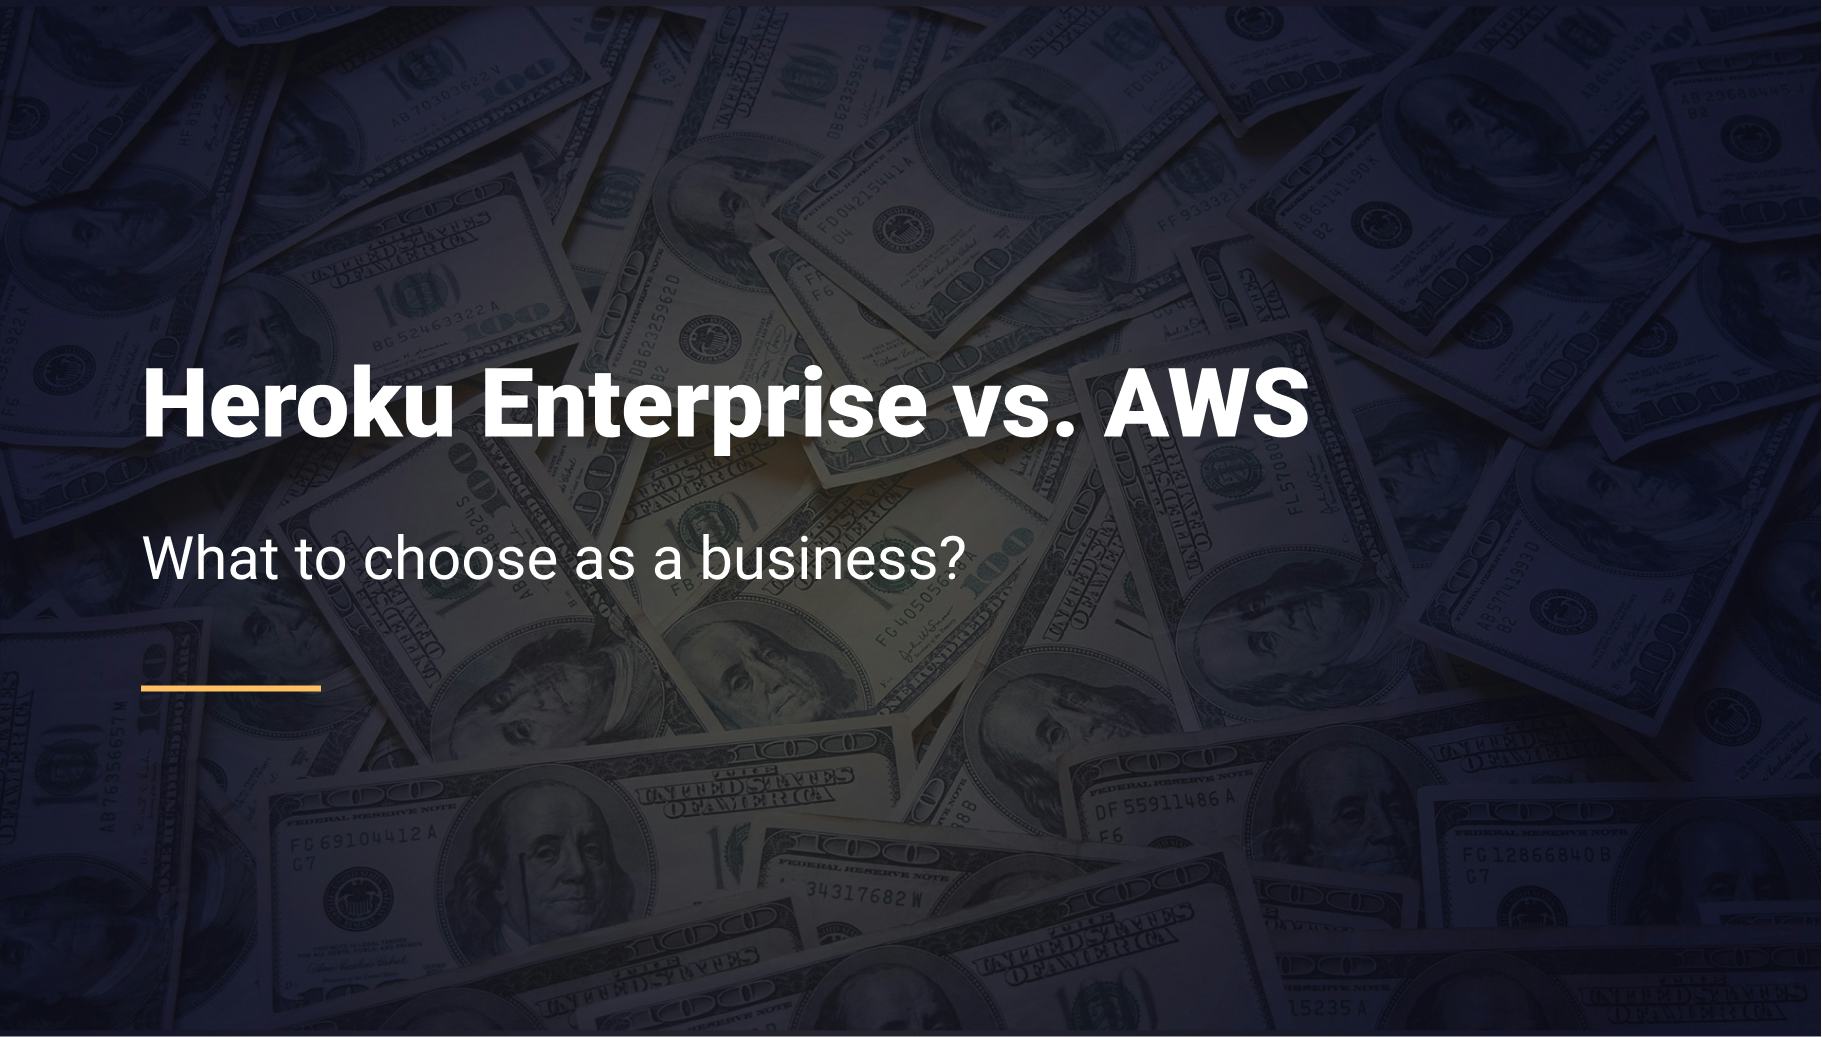 Heroku Enterprise vs. AWS: What to choose as a business in 2023? - Qovery